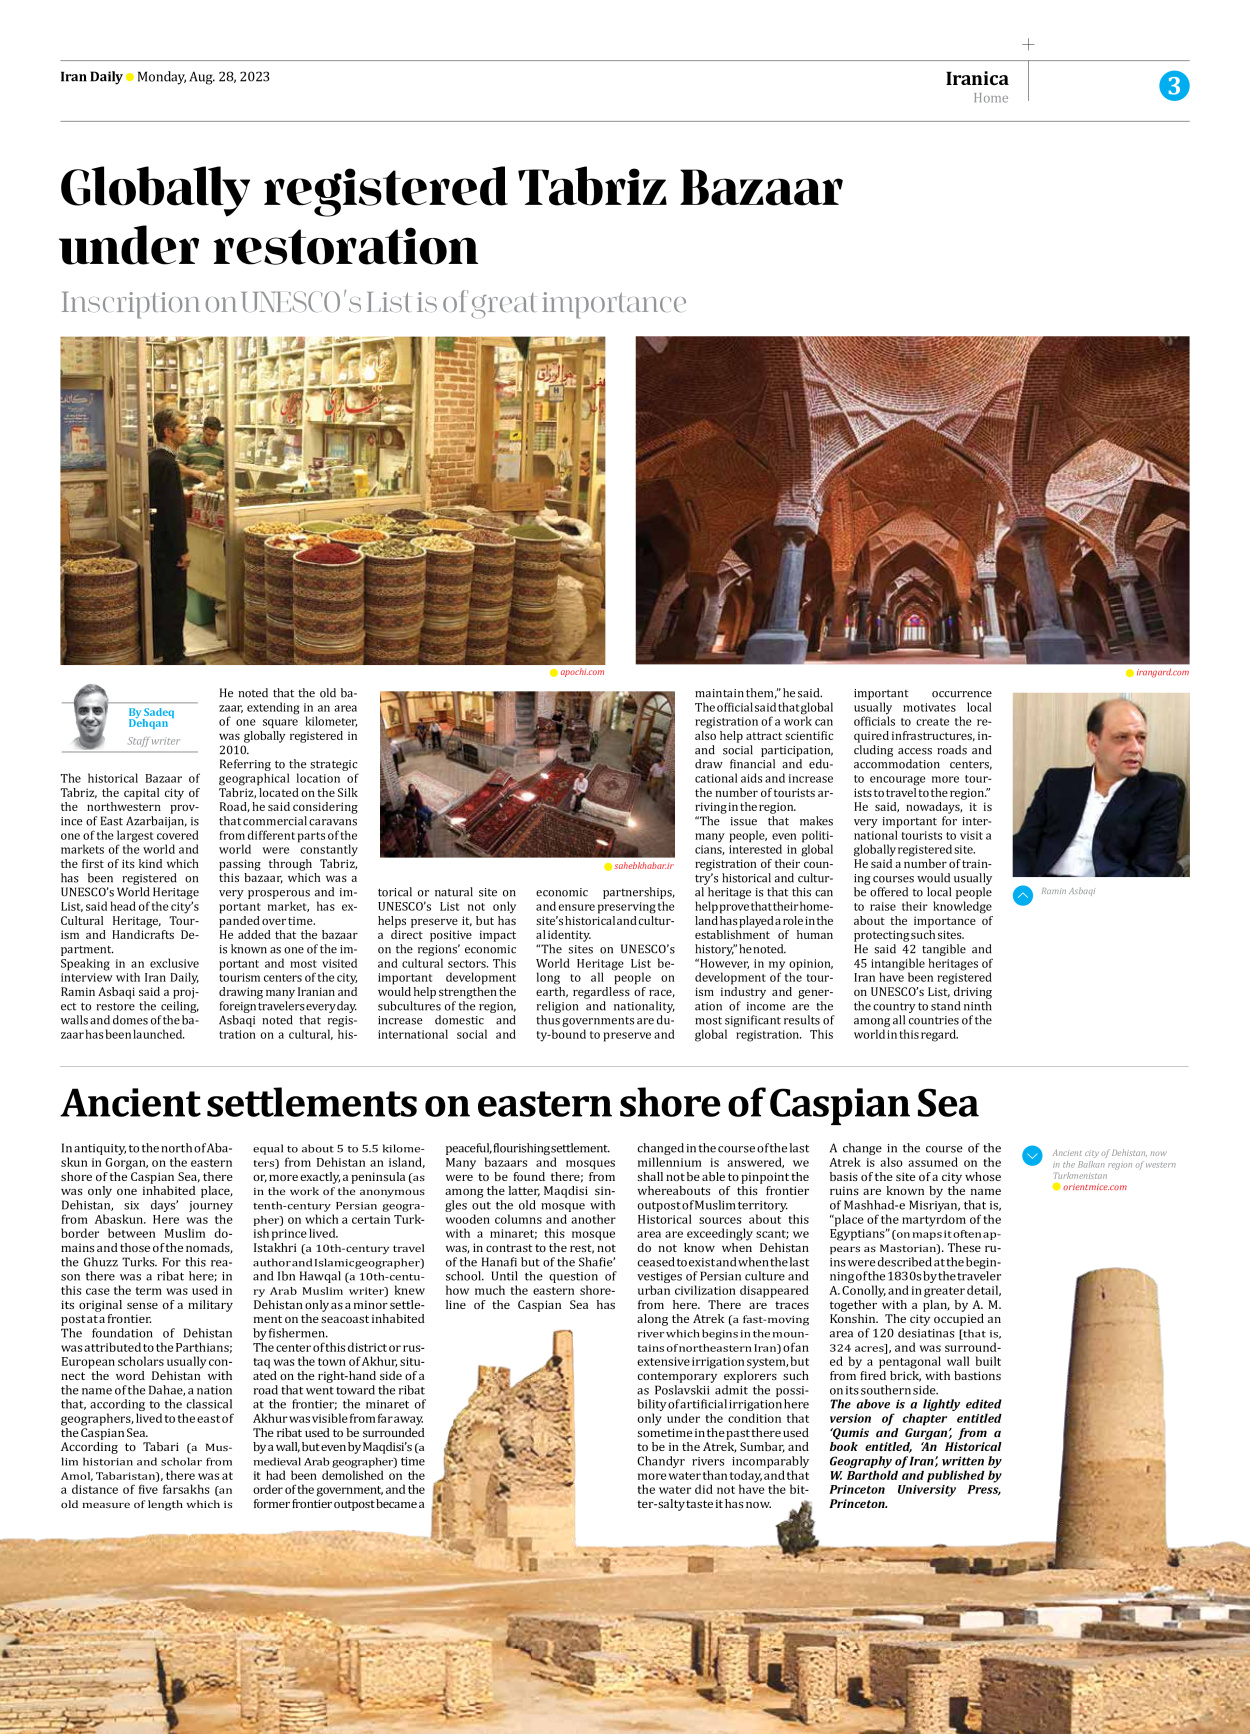 Iran Daily - Number Seven Thousand Three Hundred and Seventy Four - 28 August 2023 - Page 3